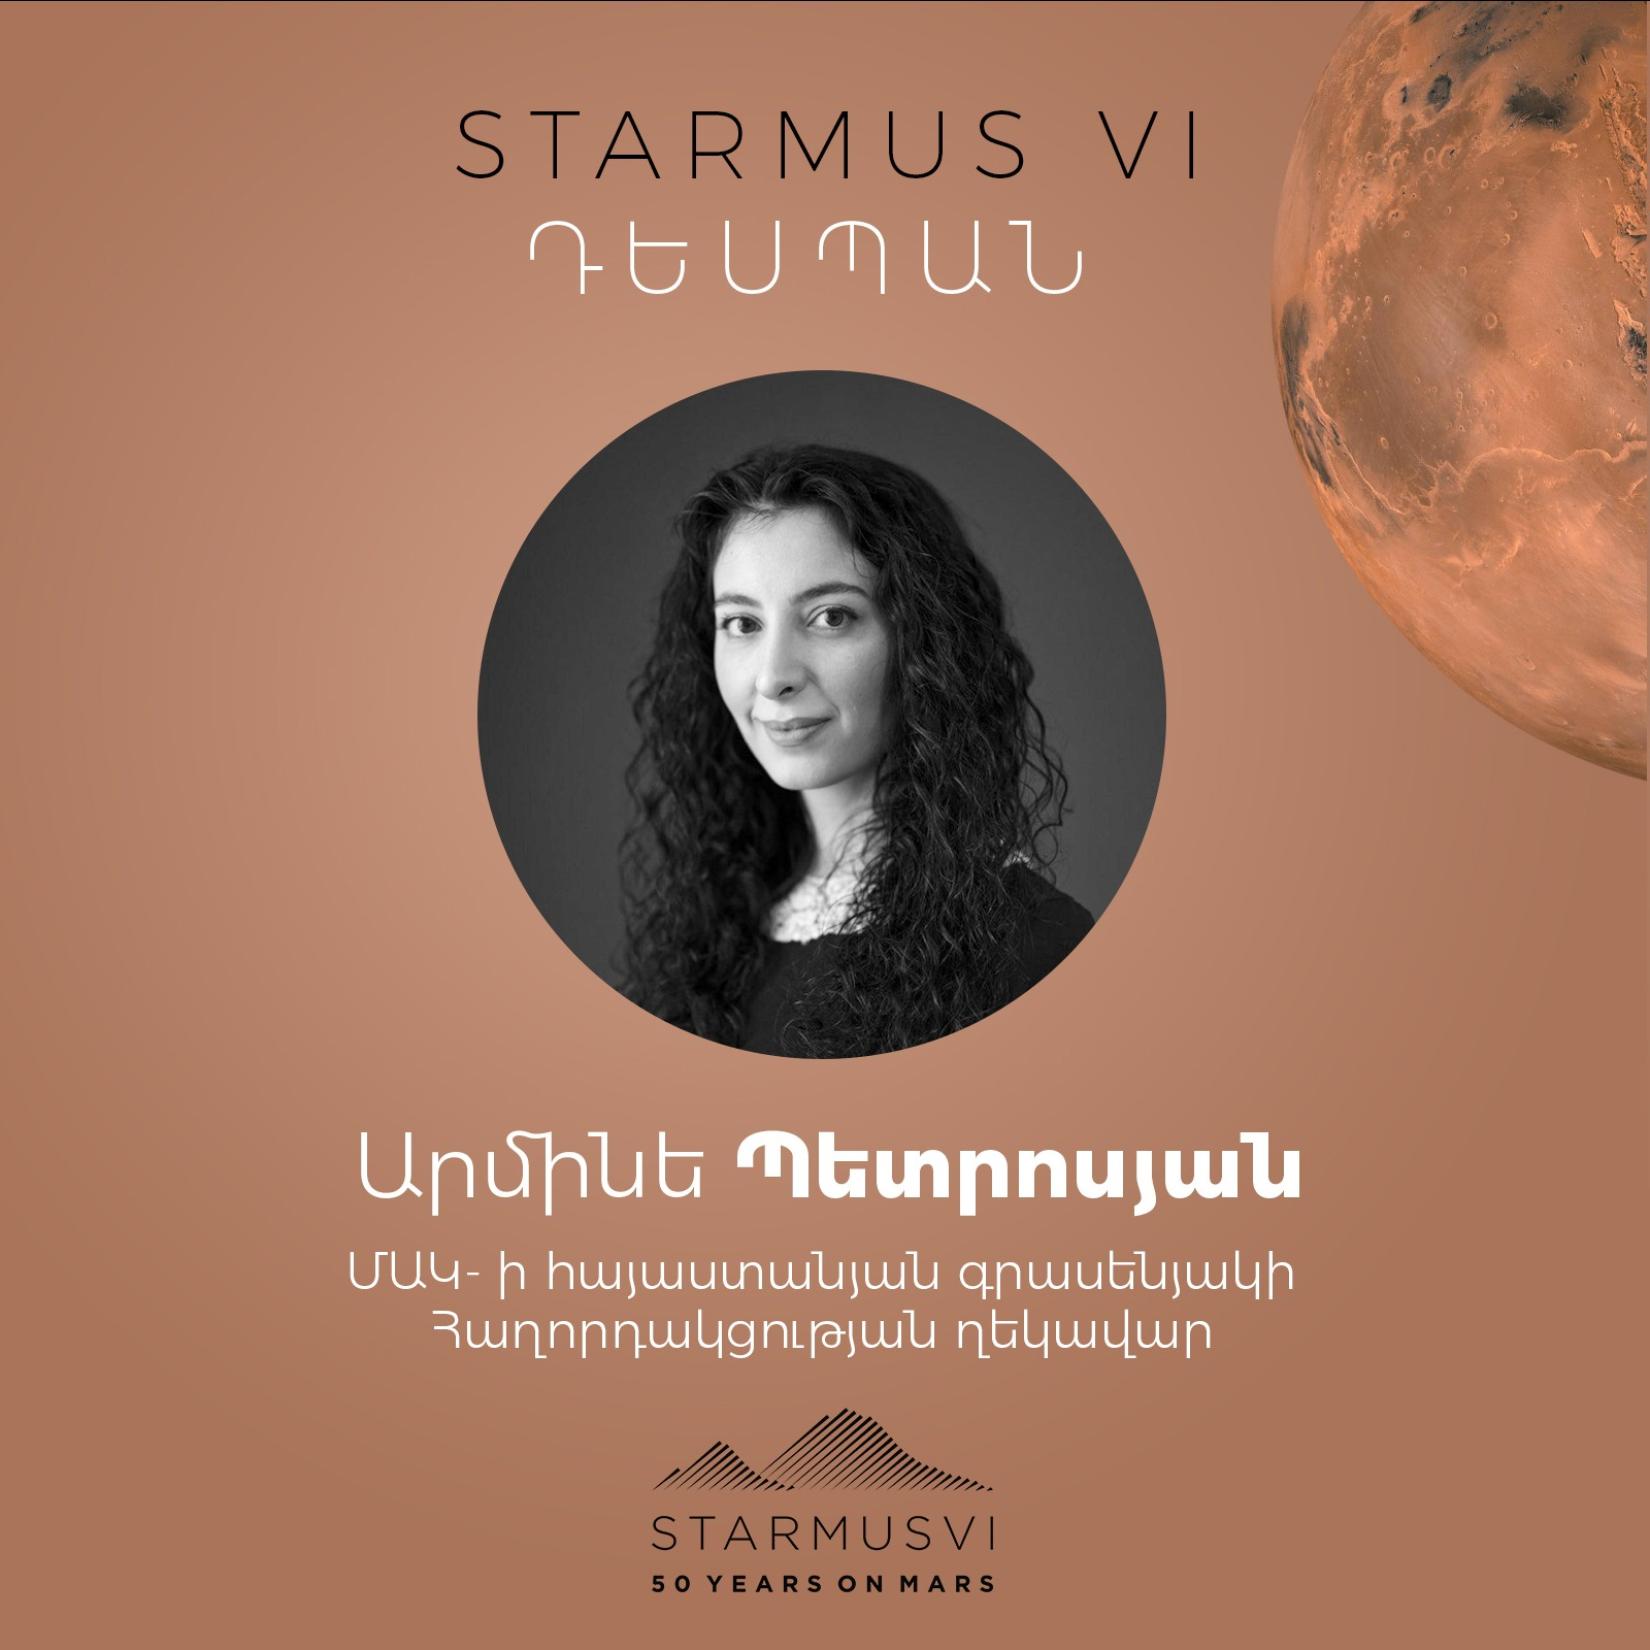 A poster informing that Armine Petrosyan, UN Armenia National Information Officer, was an ambassador of the 6th STARMUS, a world-scale Science and Art Festival.